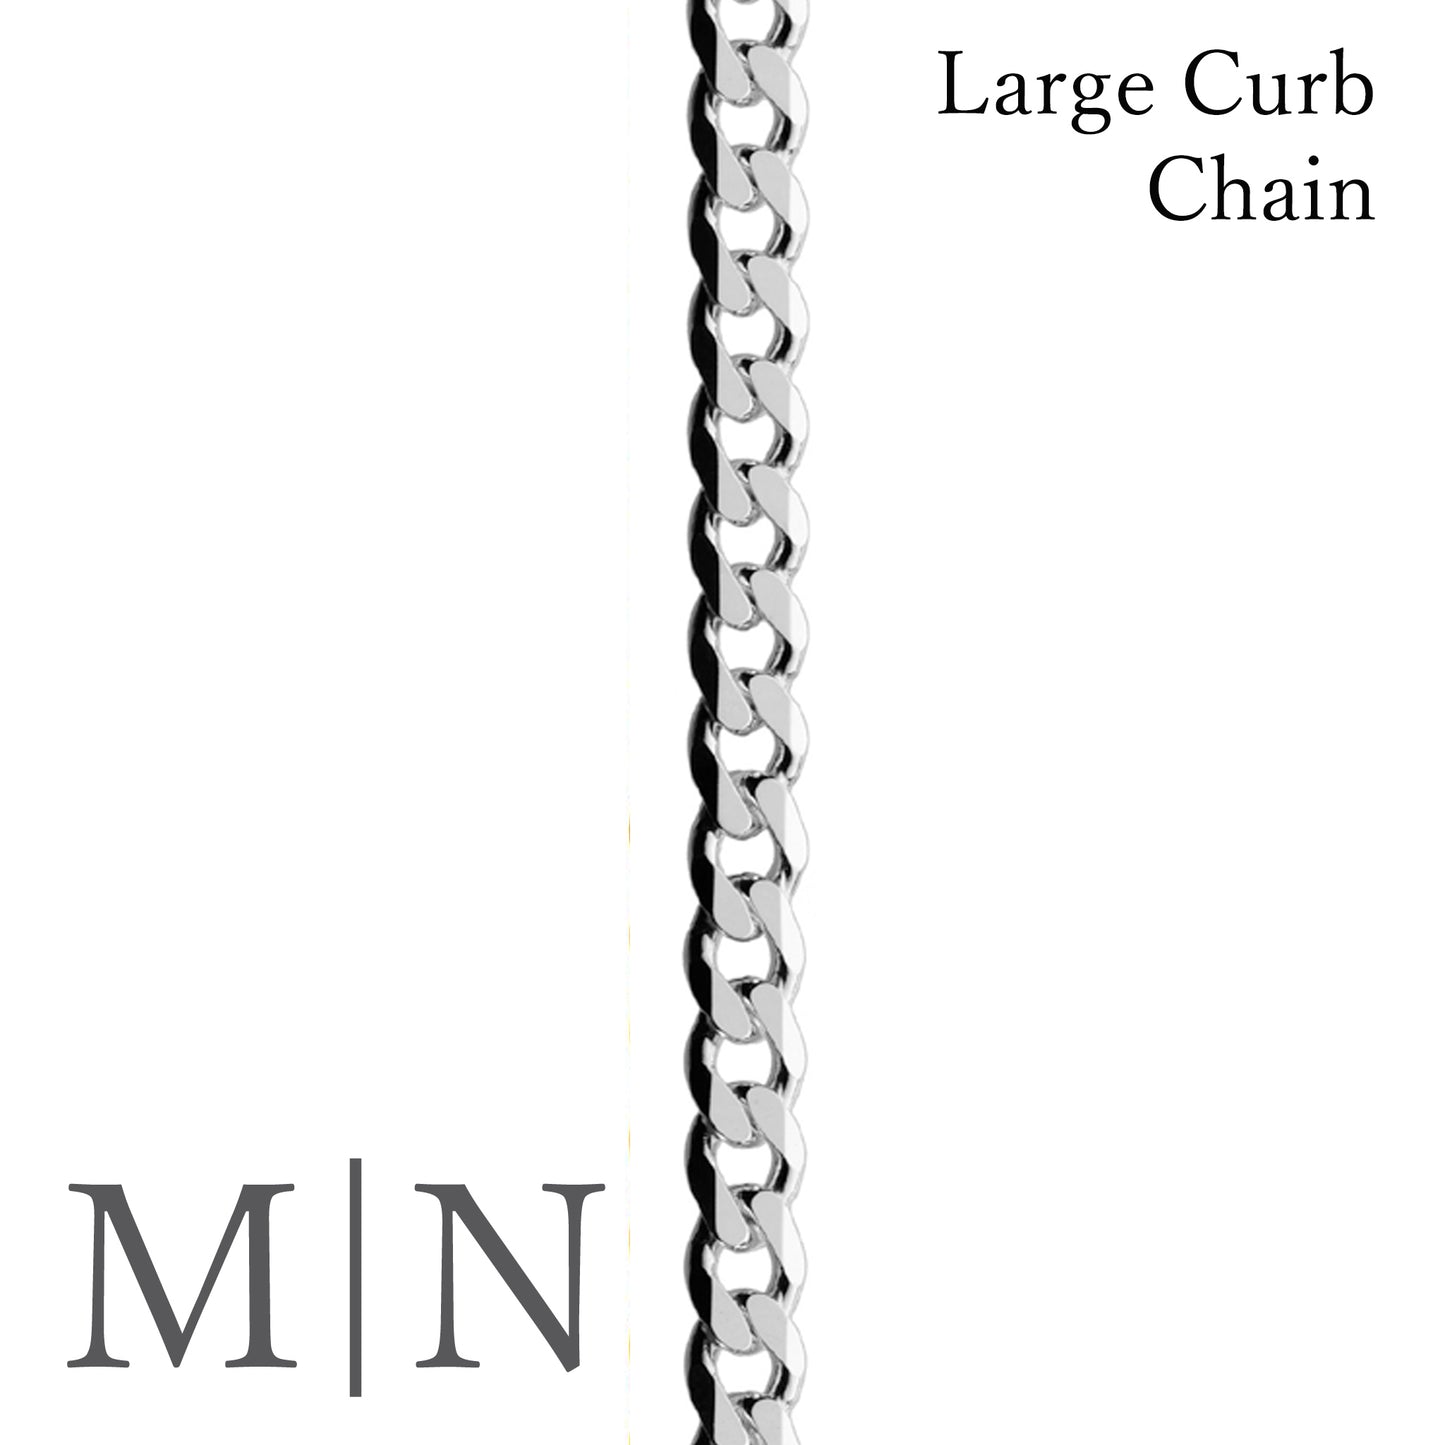 Large Curb Chains